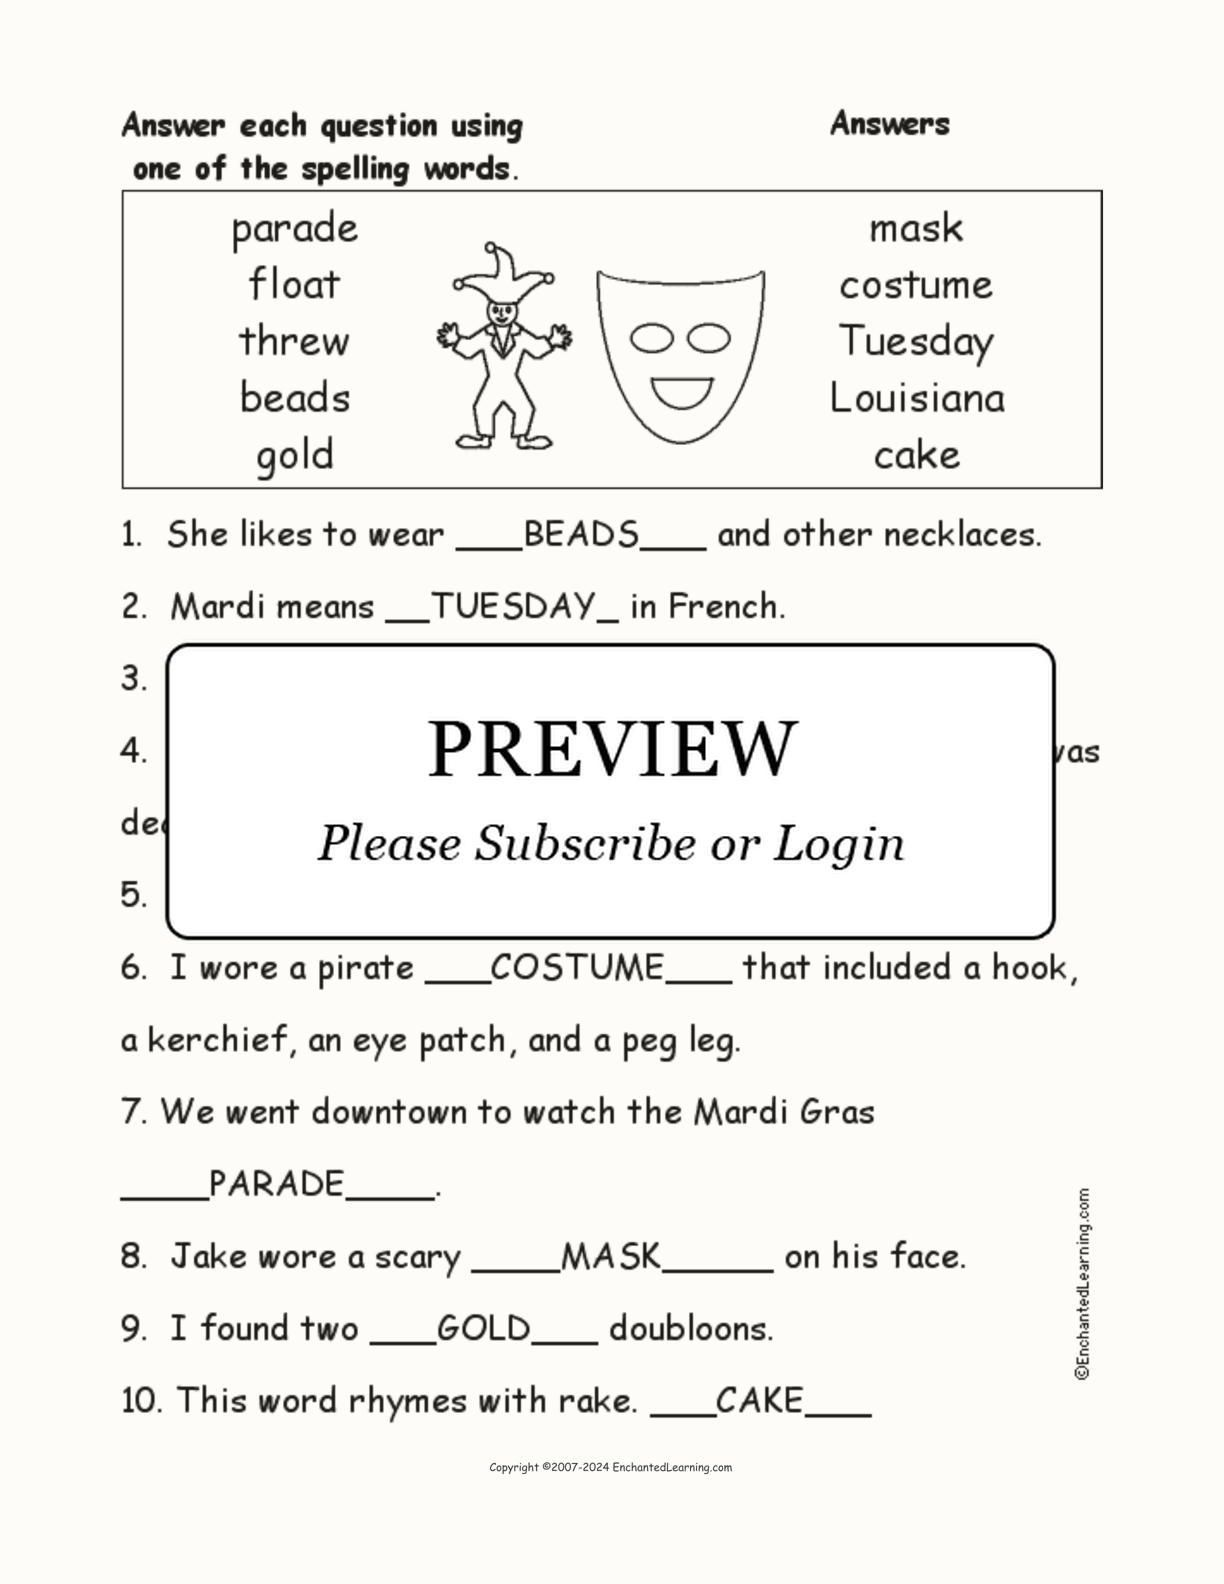 Mardi Gras Spelling Word Questions interactive worksheet page 2